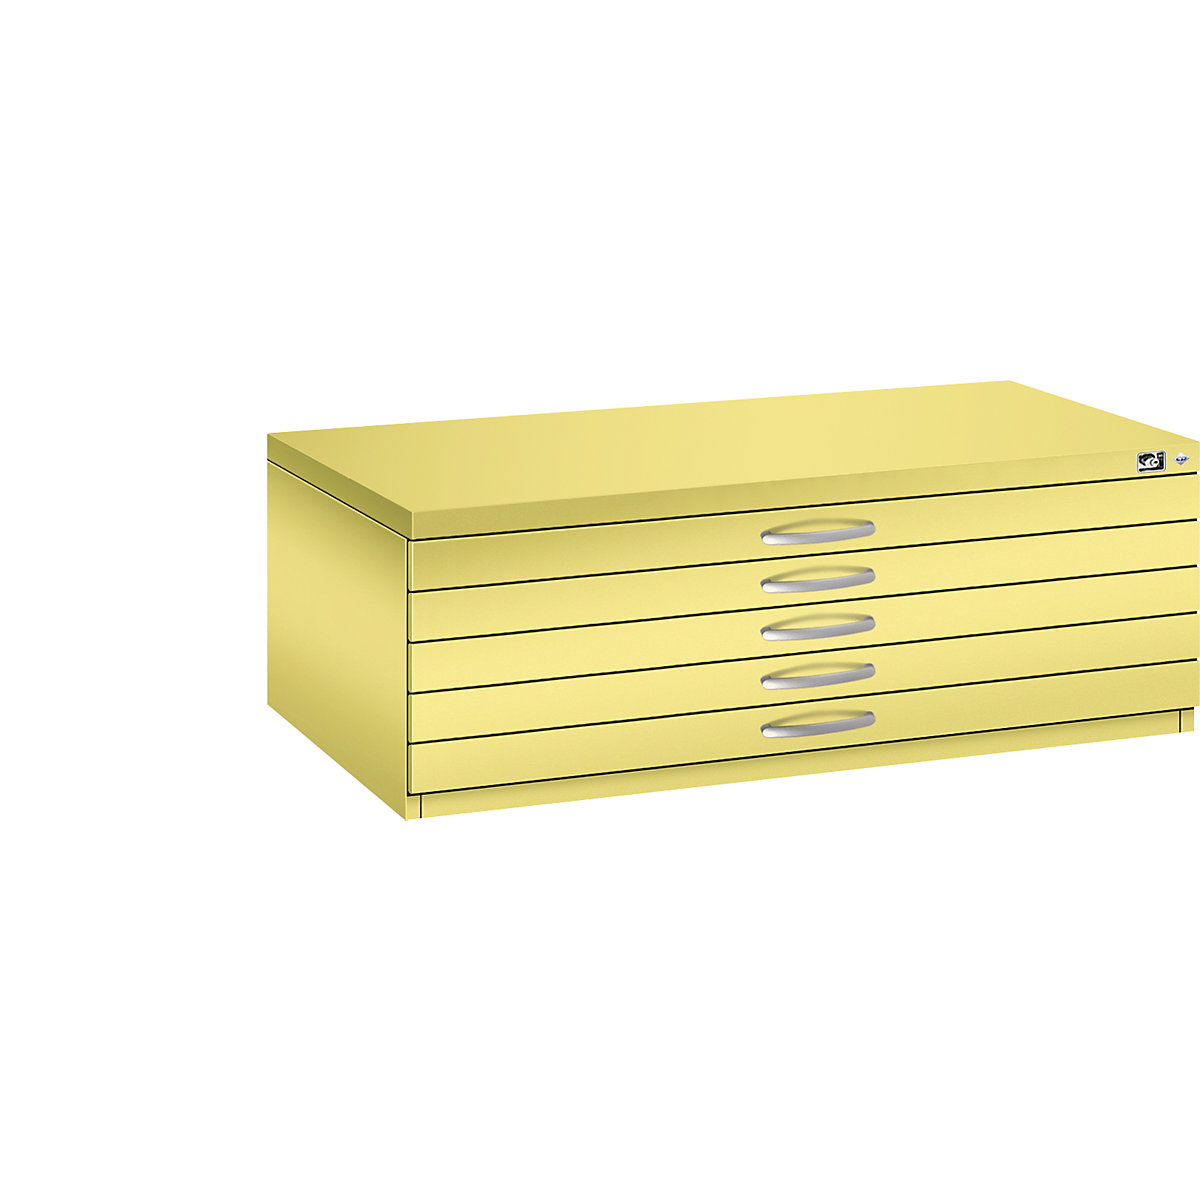 Drawing cabinet – C+P, A1, 5 drawers, height 420 mm, sulphur yellow-12